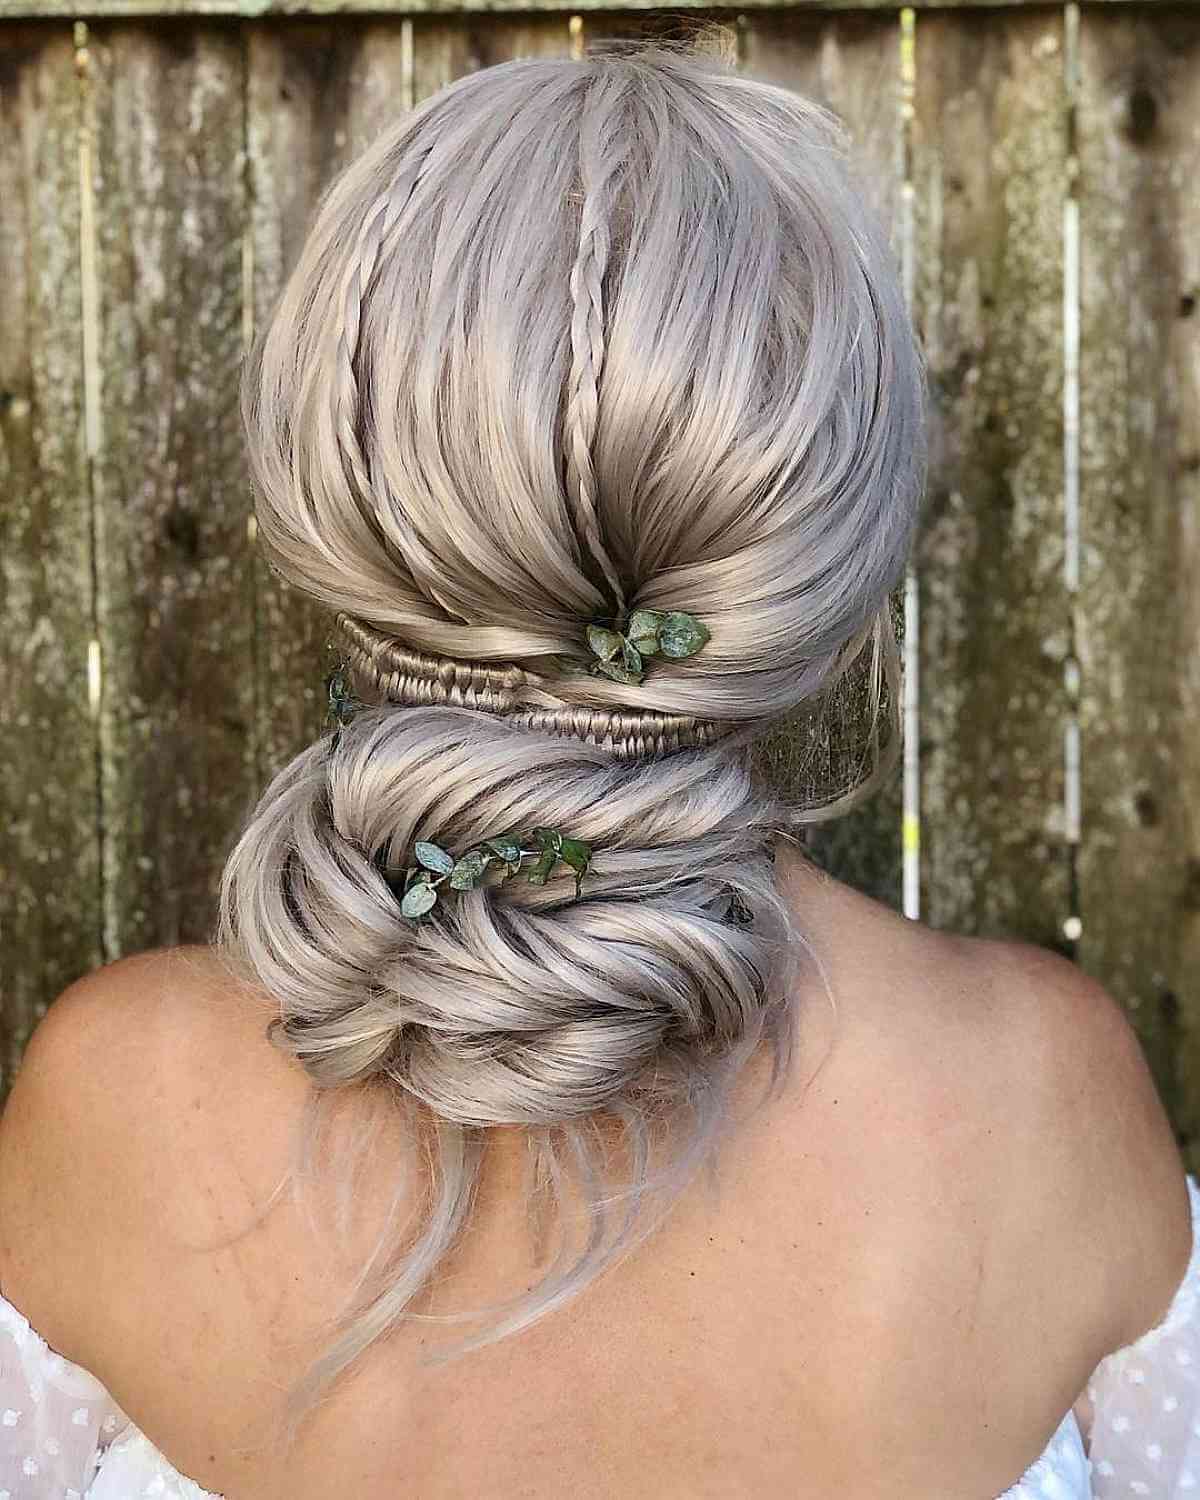 Updo with Fancy Braided Accents